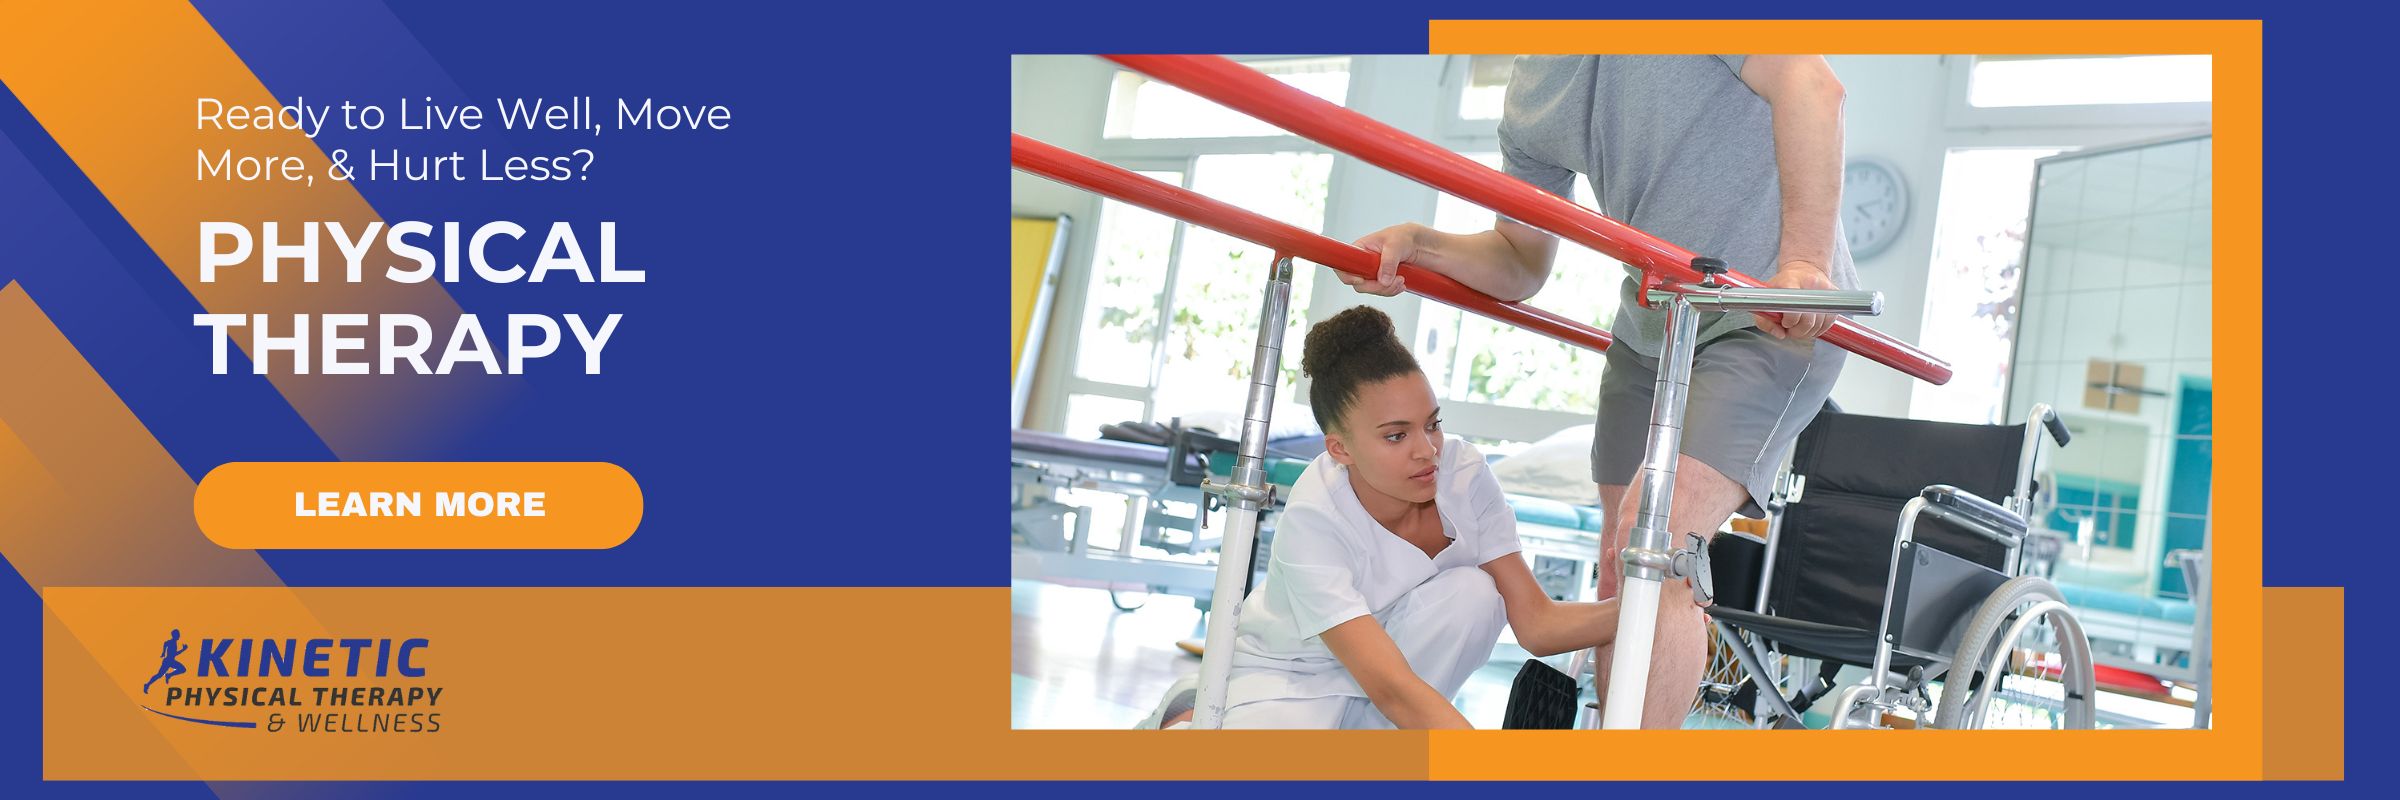 Physical Therapy Learn More